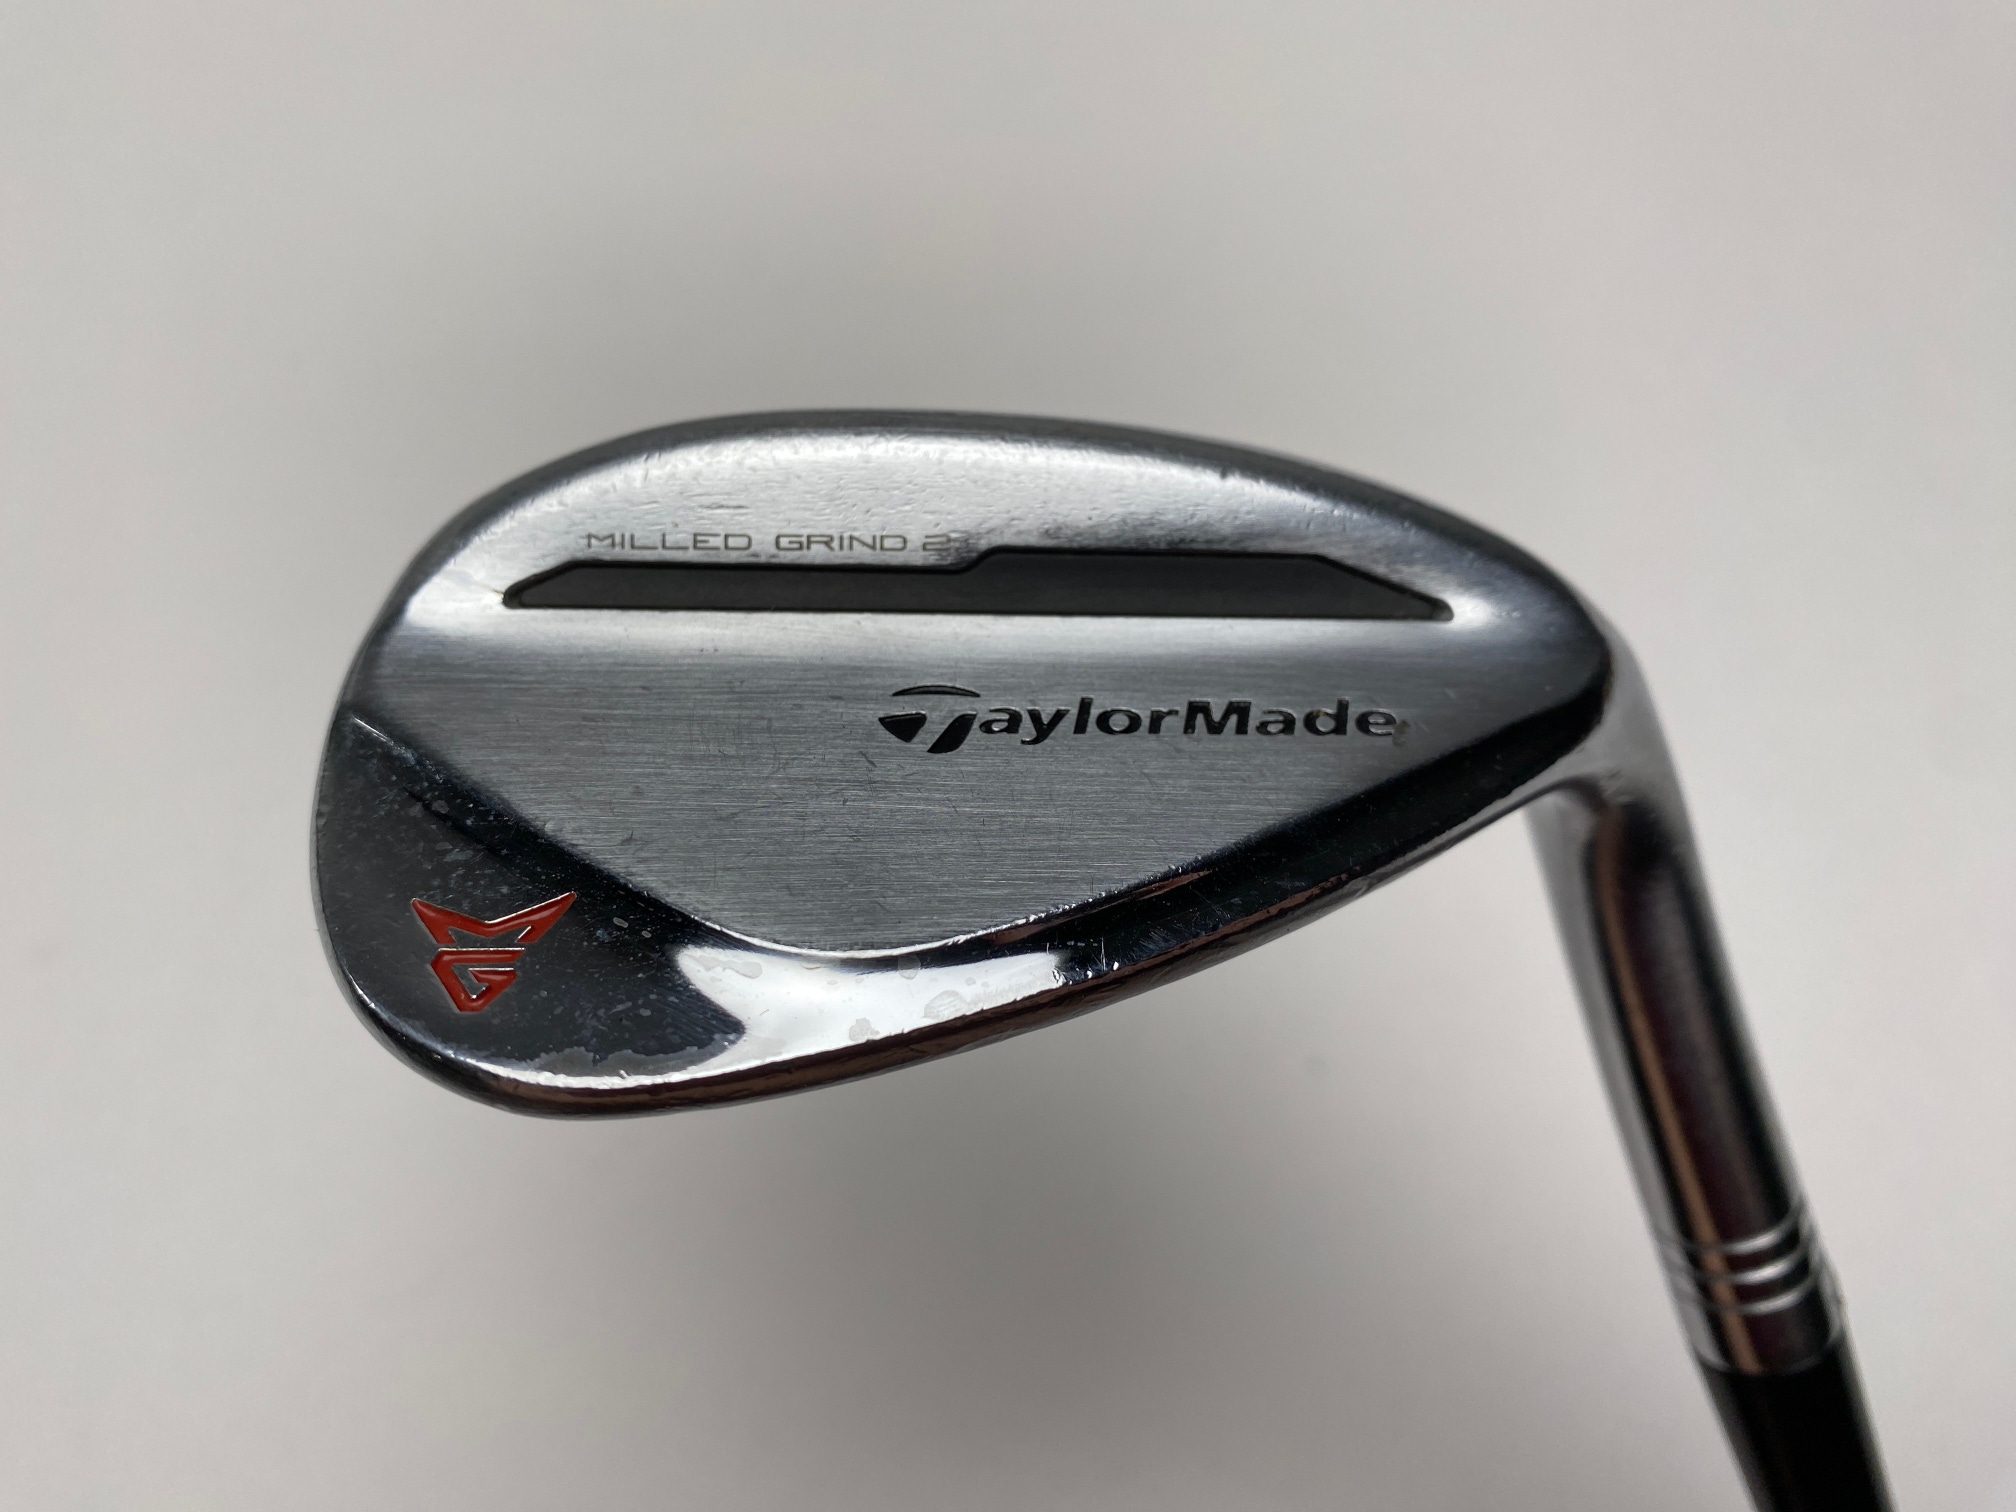 Taylormade Milled Grind 2 Chrome Lob Wedge LW 58* 11 Bounce NS Pro Modus 3 RH